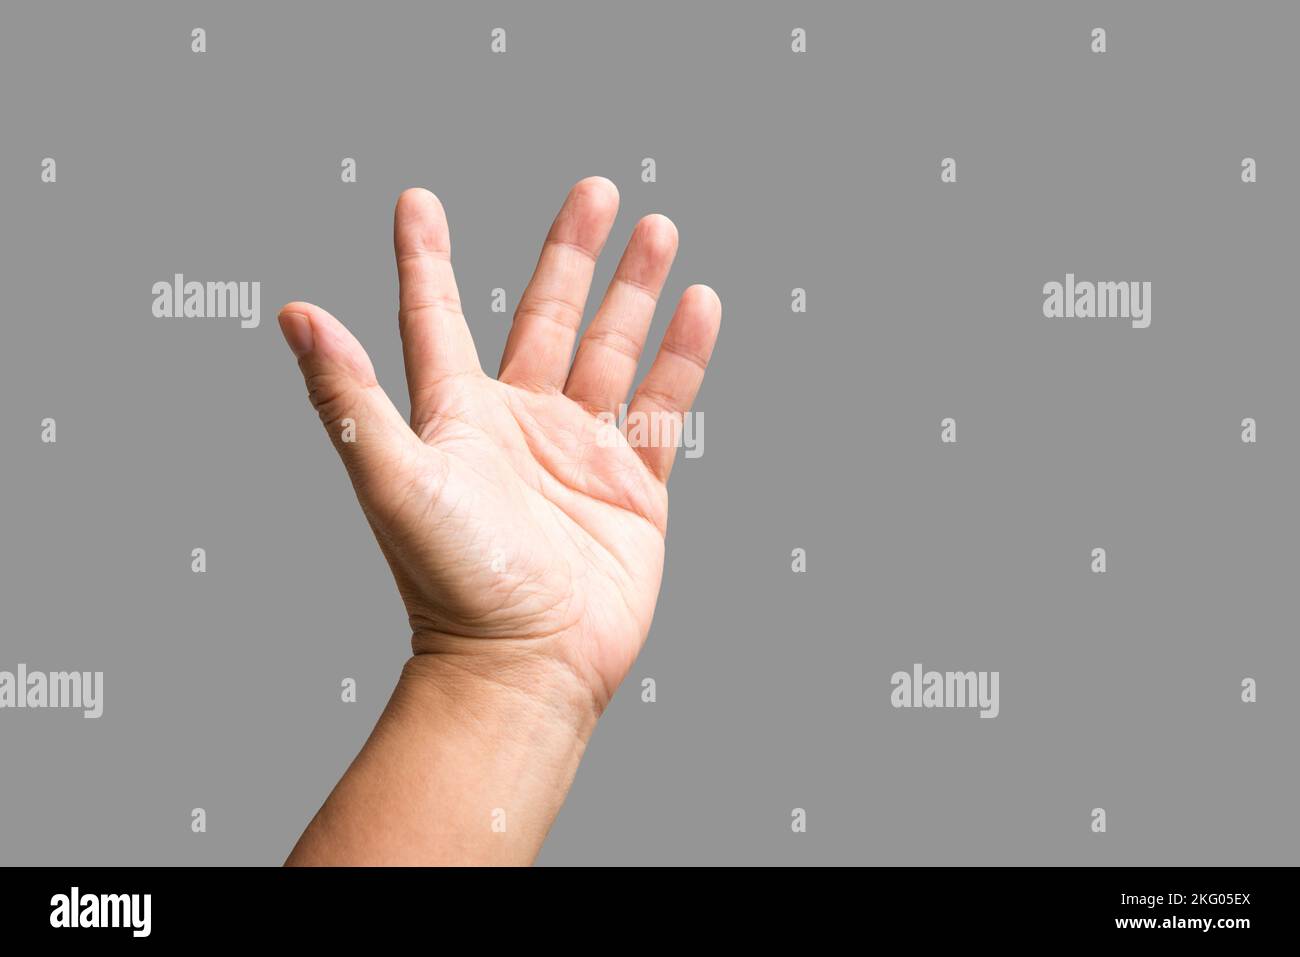 Hand reaching up. On gray background. Stock Photo